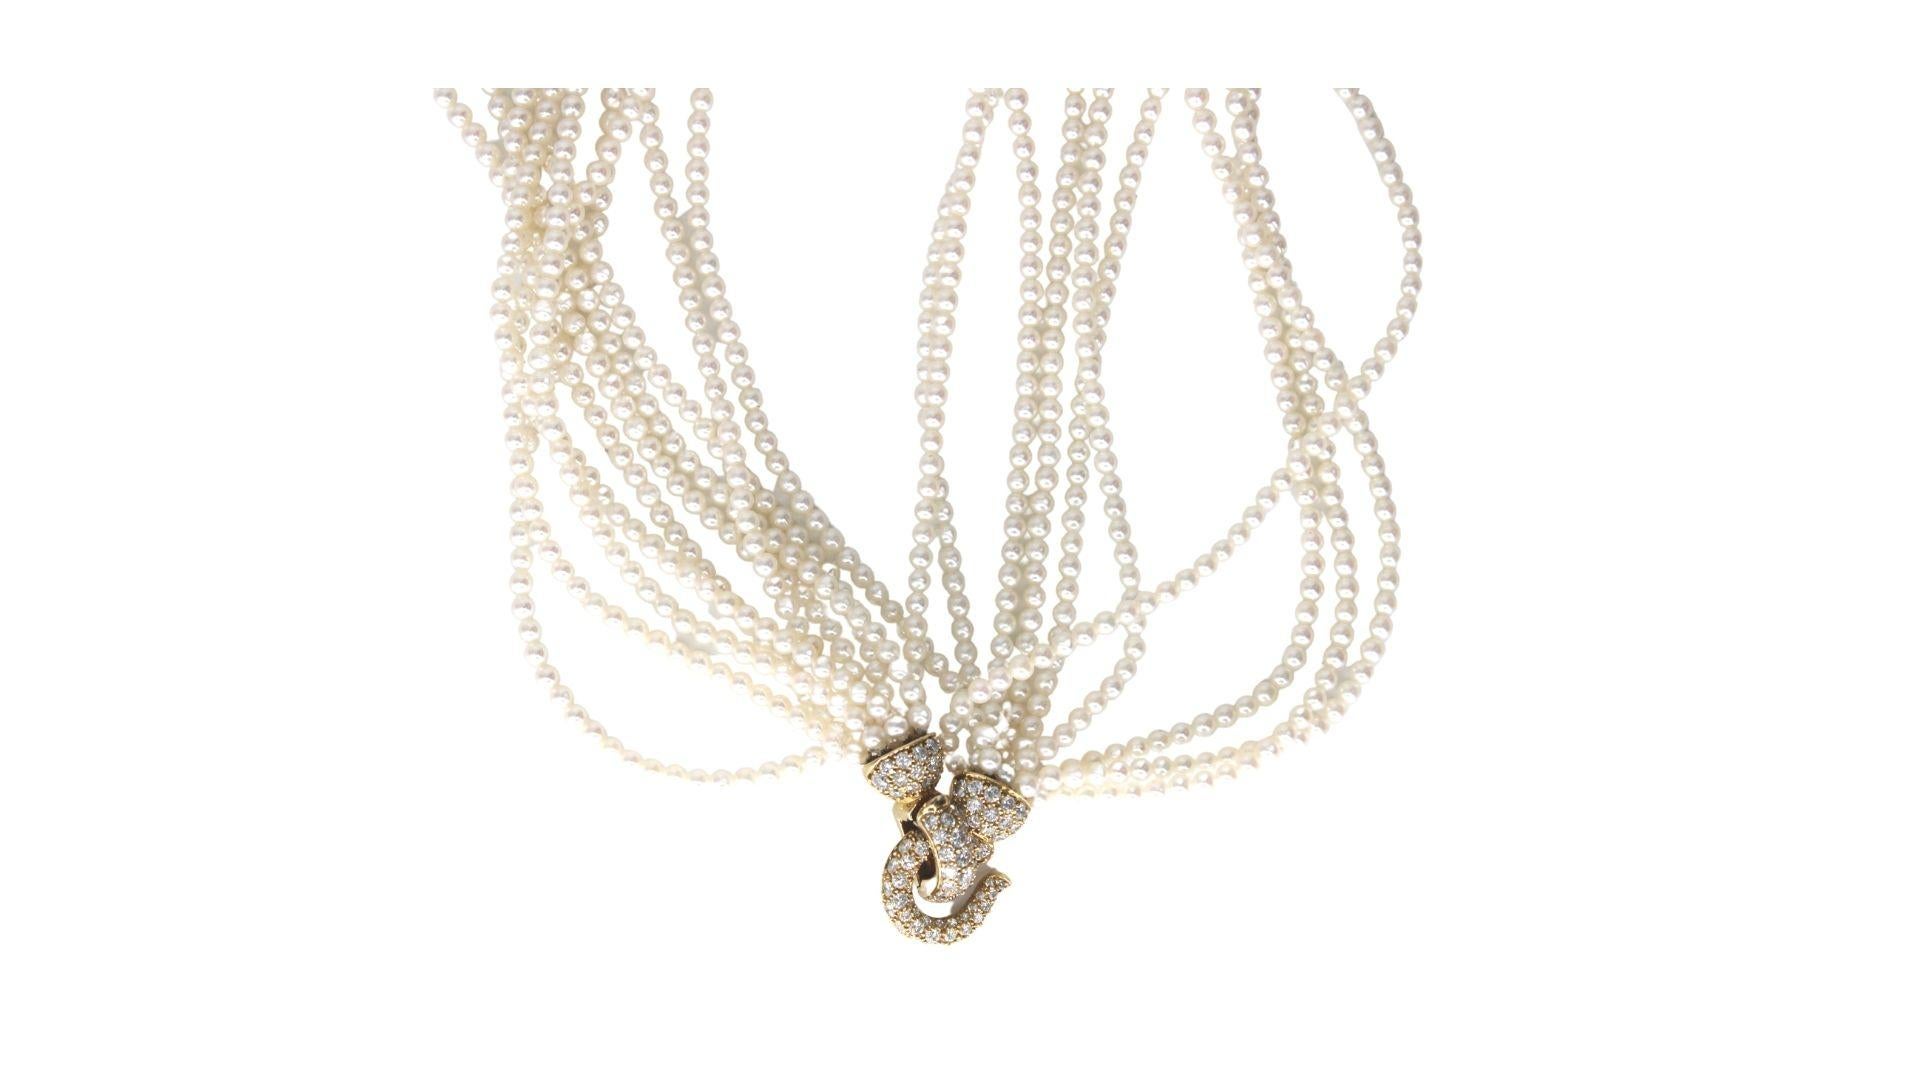 Exclusive sea pearls necklace made of perfectly round shaped pearls.
Top luster, perfect skin sold by Cartier this necklace is made out of 1.90k diamonds Fvvs1 and 18k yellow gold and diamond clasp.
*Signed by Cartier* 

Length : 42 cm = 16.53 inches